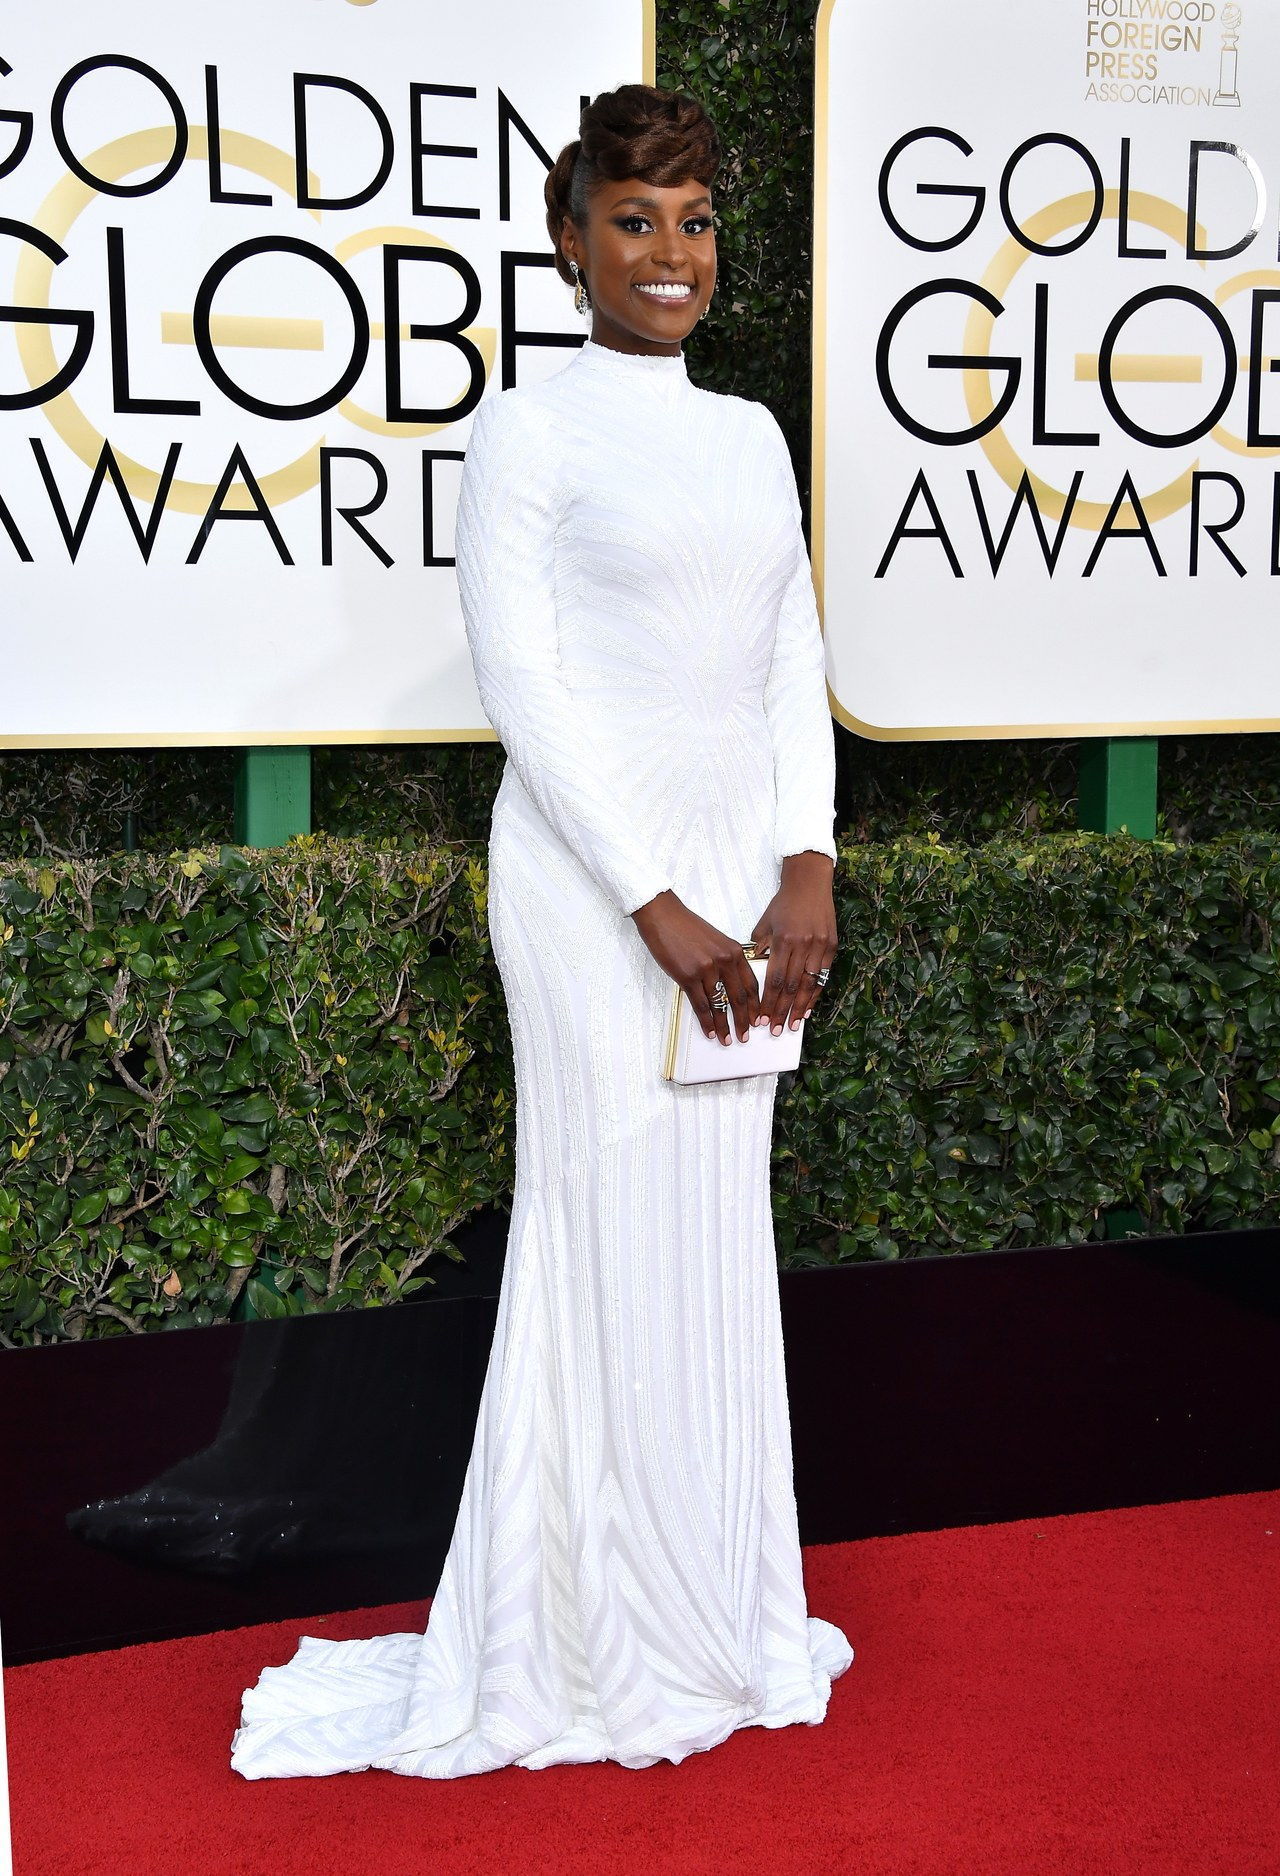 BEVERLY HILLS, CA - JANUARY 08: Actress Issa Rae attends the 74th Annual Golden Globe Awards at The Beverly Hilton Hotel on January 8, 2017 in Beverly Hills, California. (Photo by Steve Granitz/WireImage)